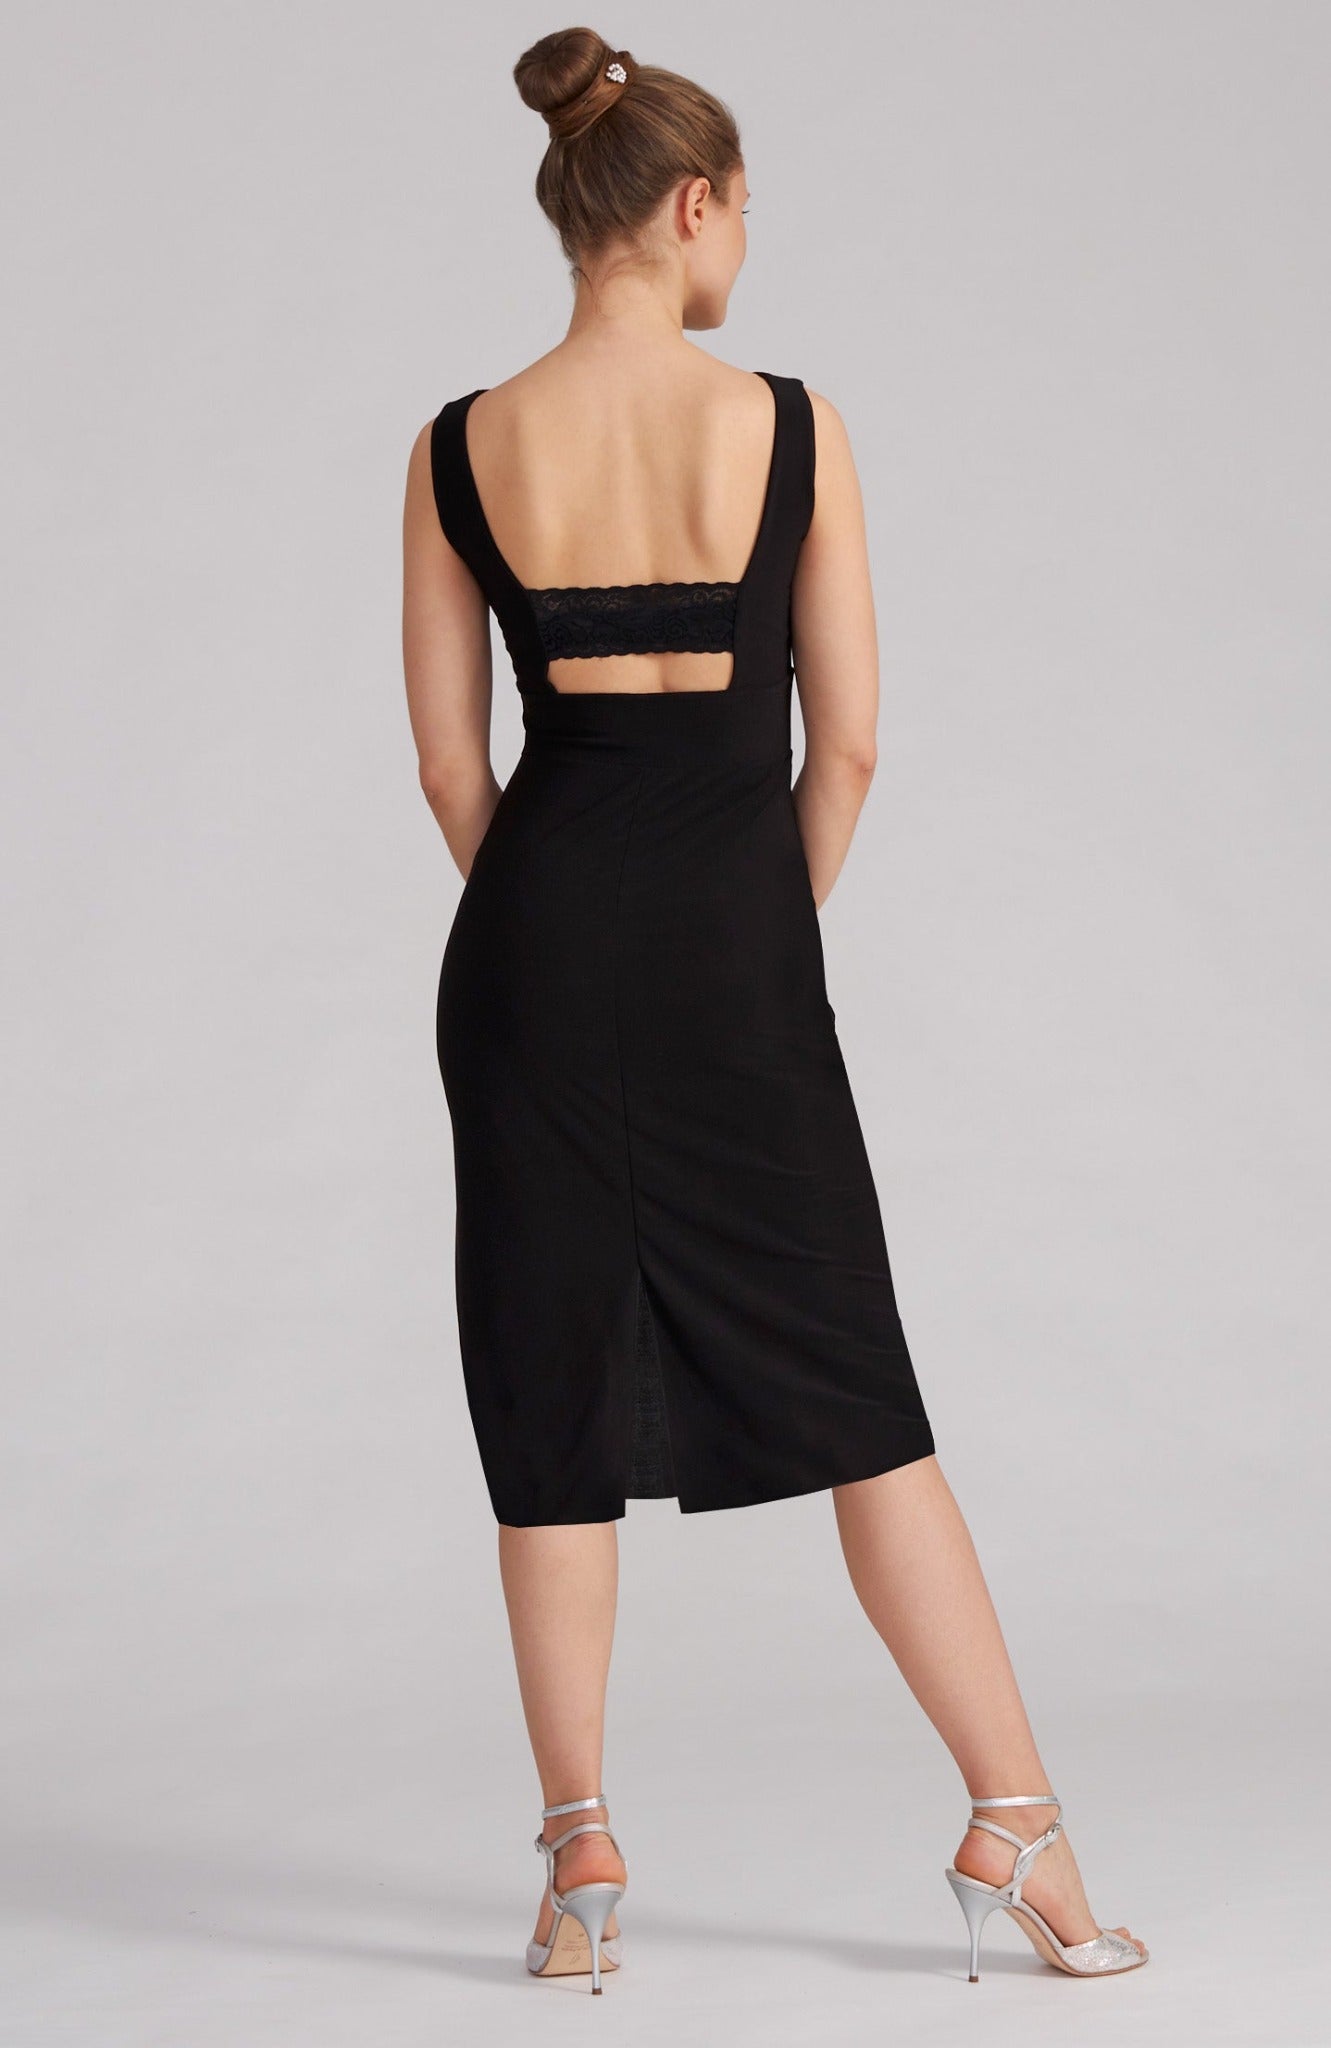 black tango dress with lace and back cutout